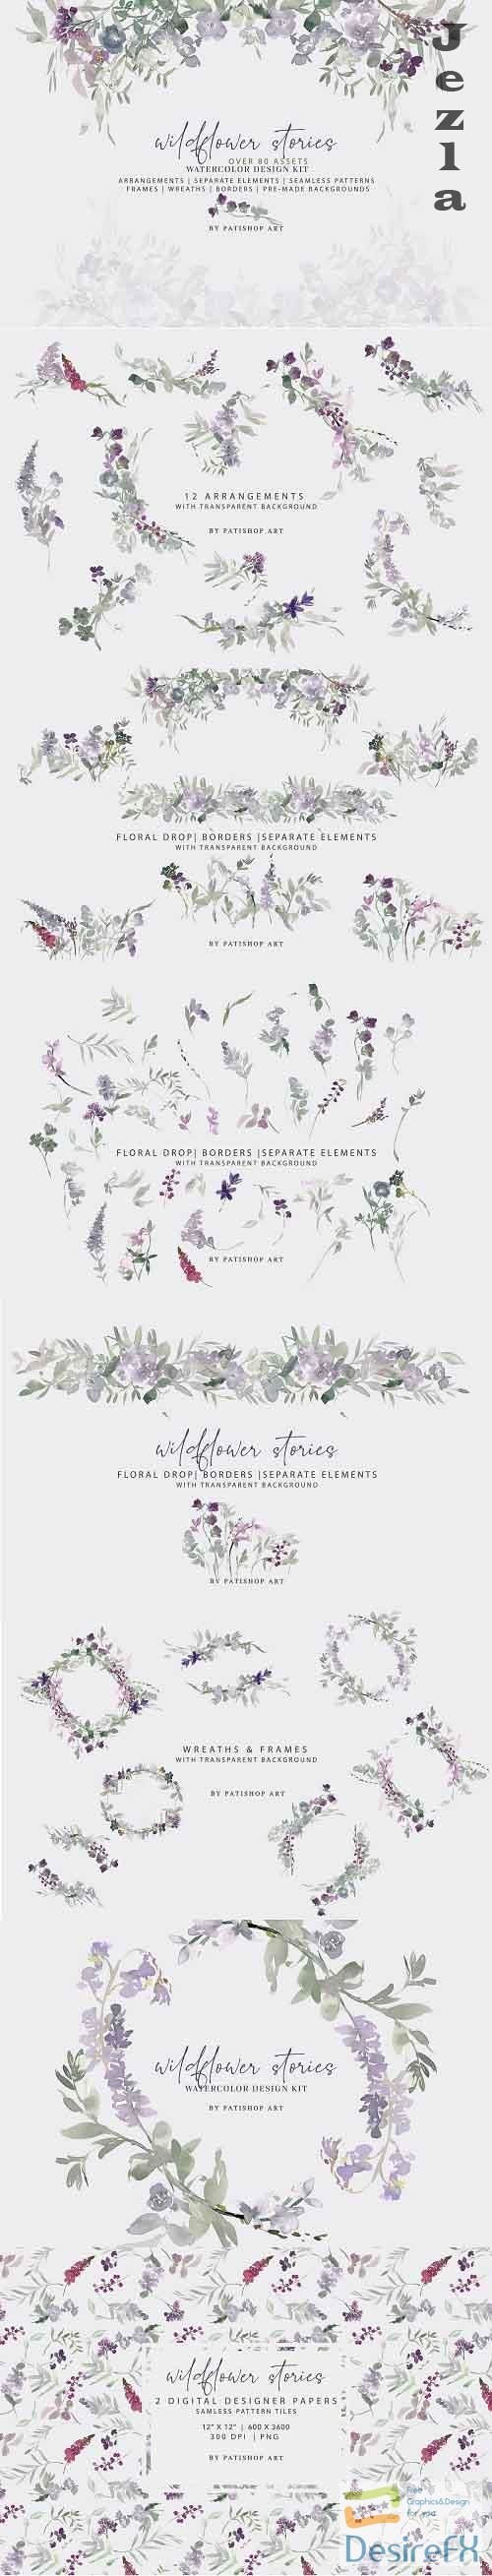 Watercolor Wildflower Clipart Set - 5133591